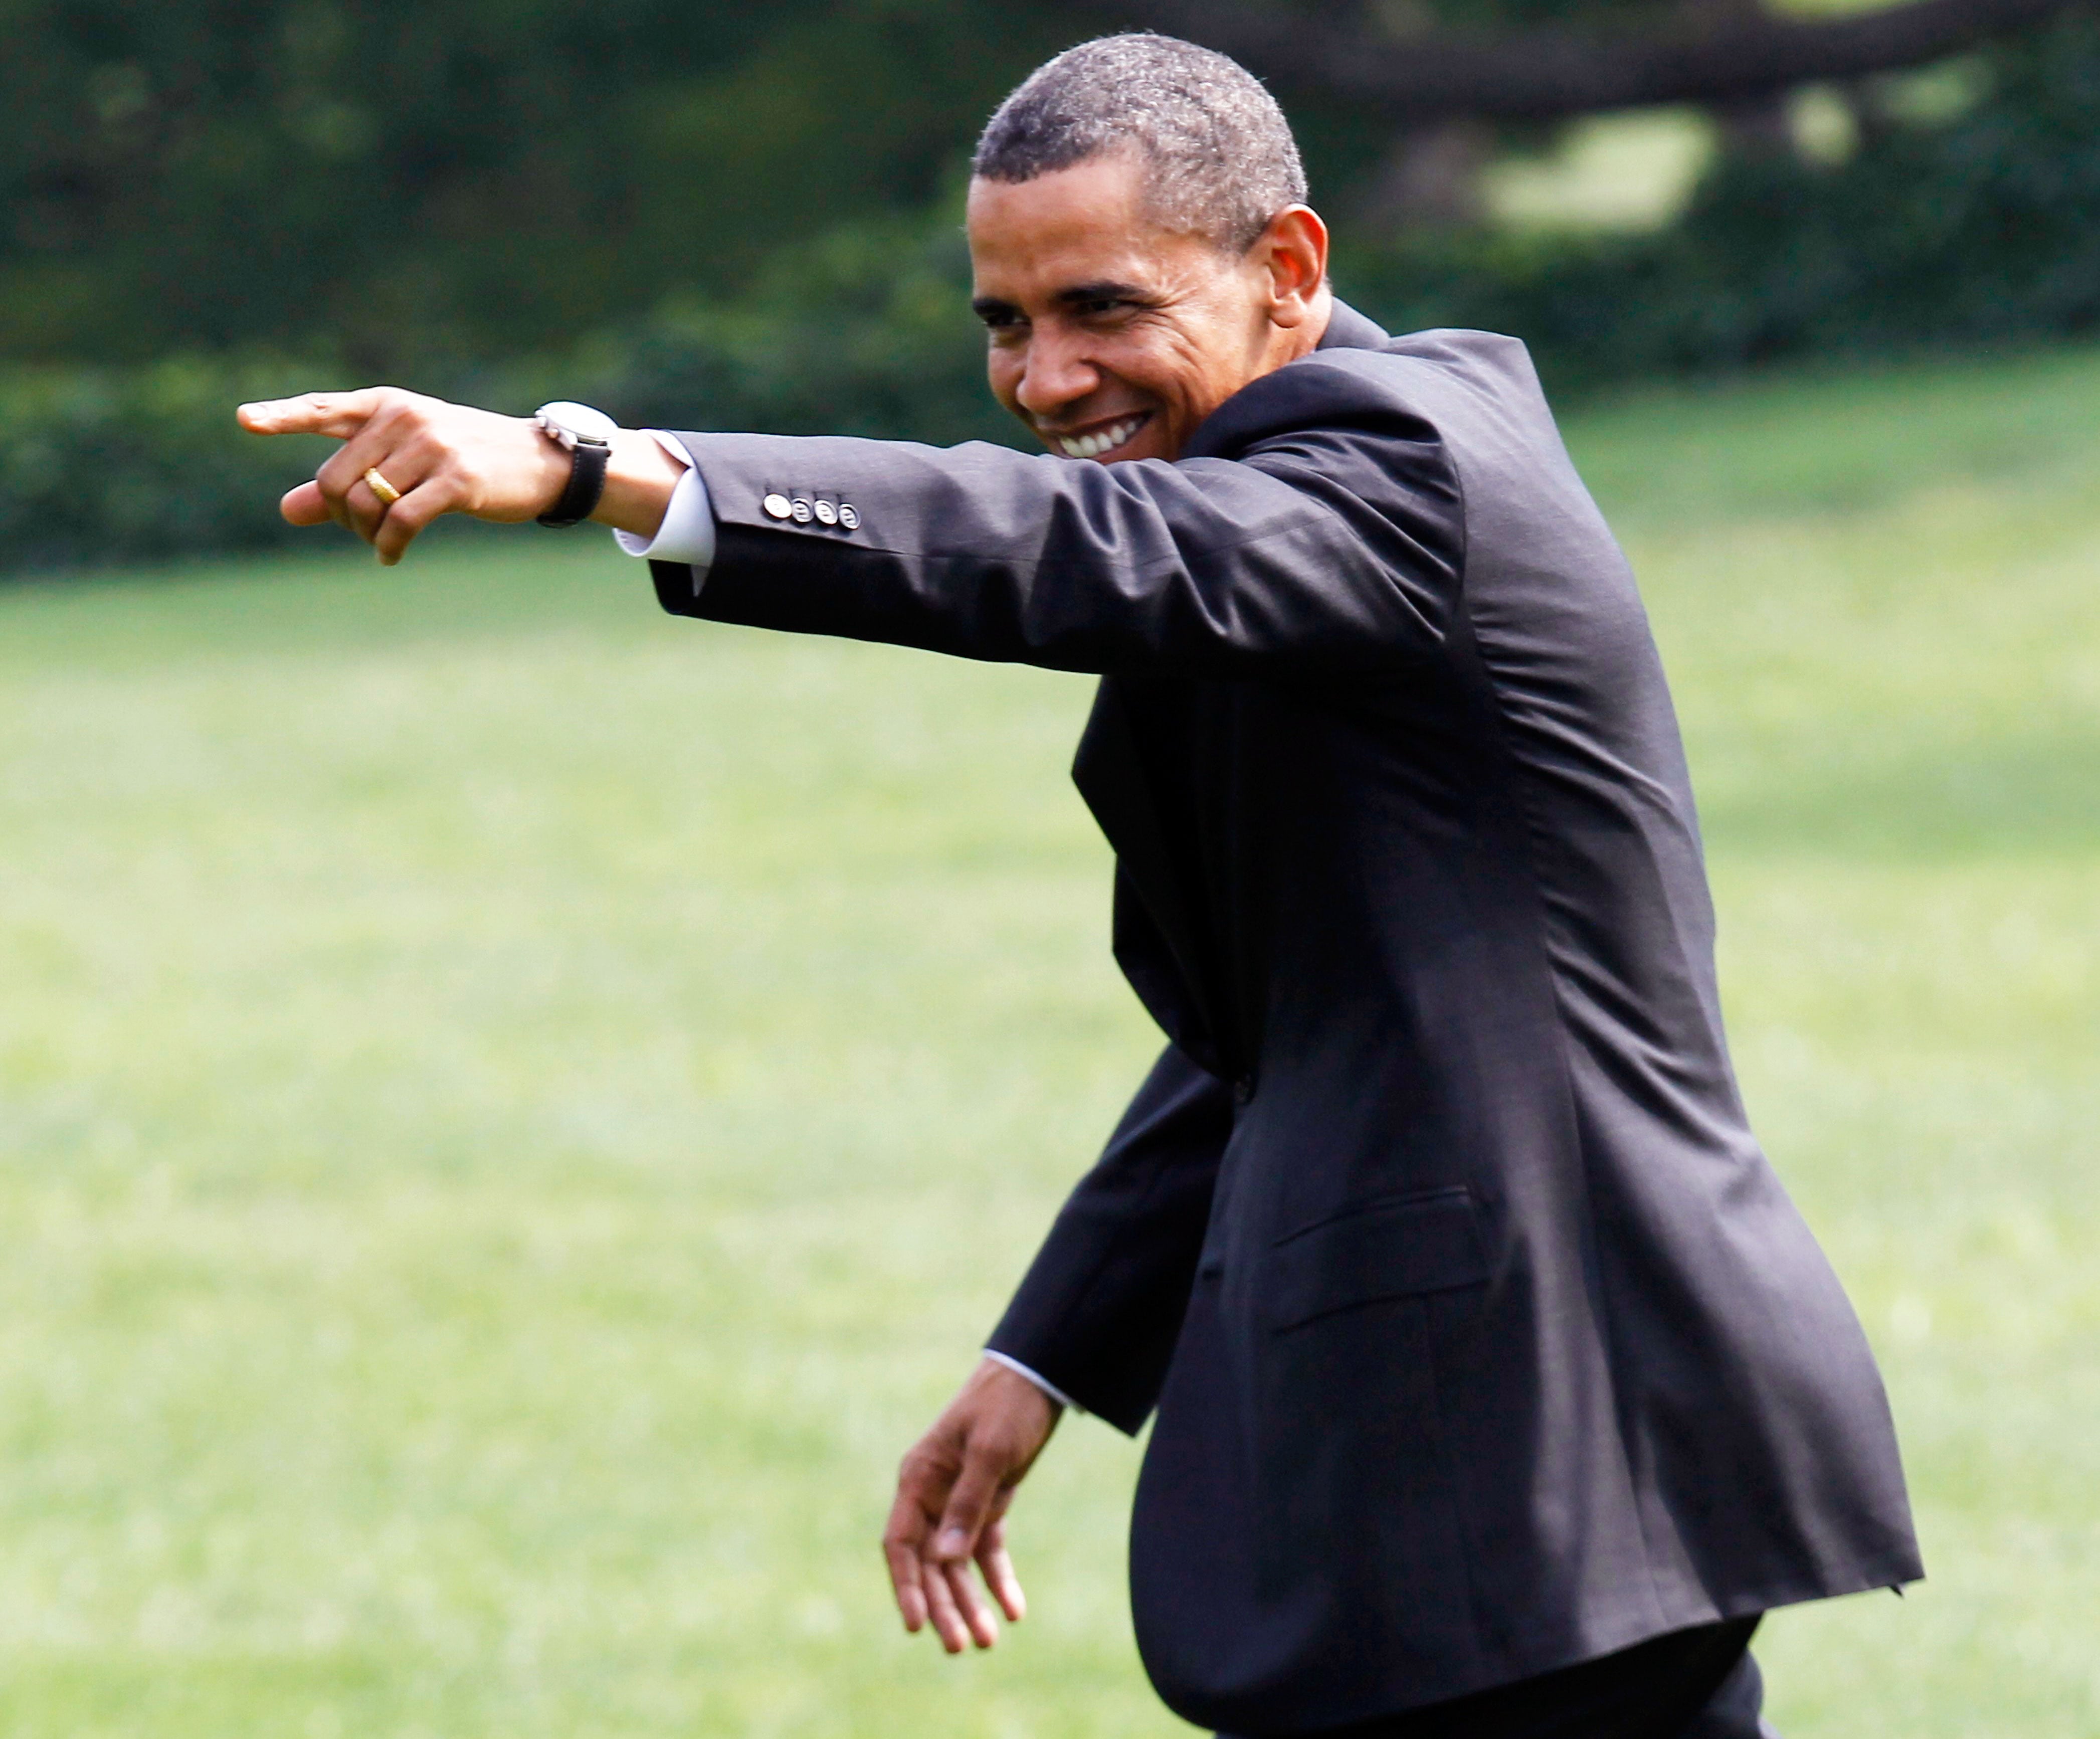 Definitive Proof That Barack Obama Was The Swaggiest President Ever
